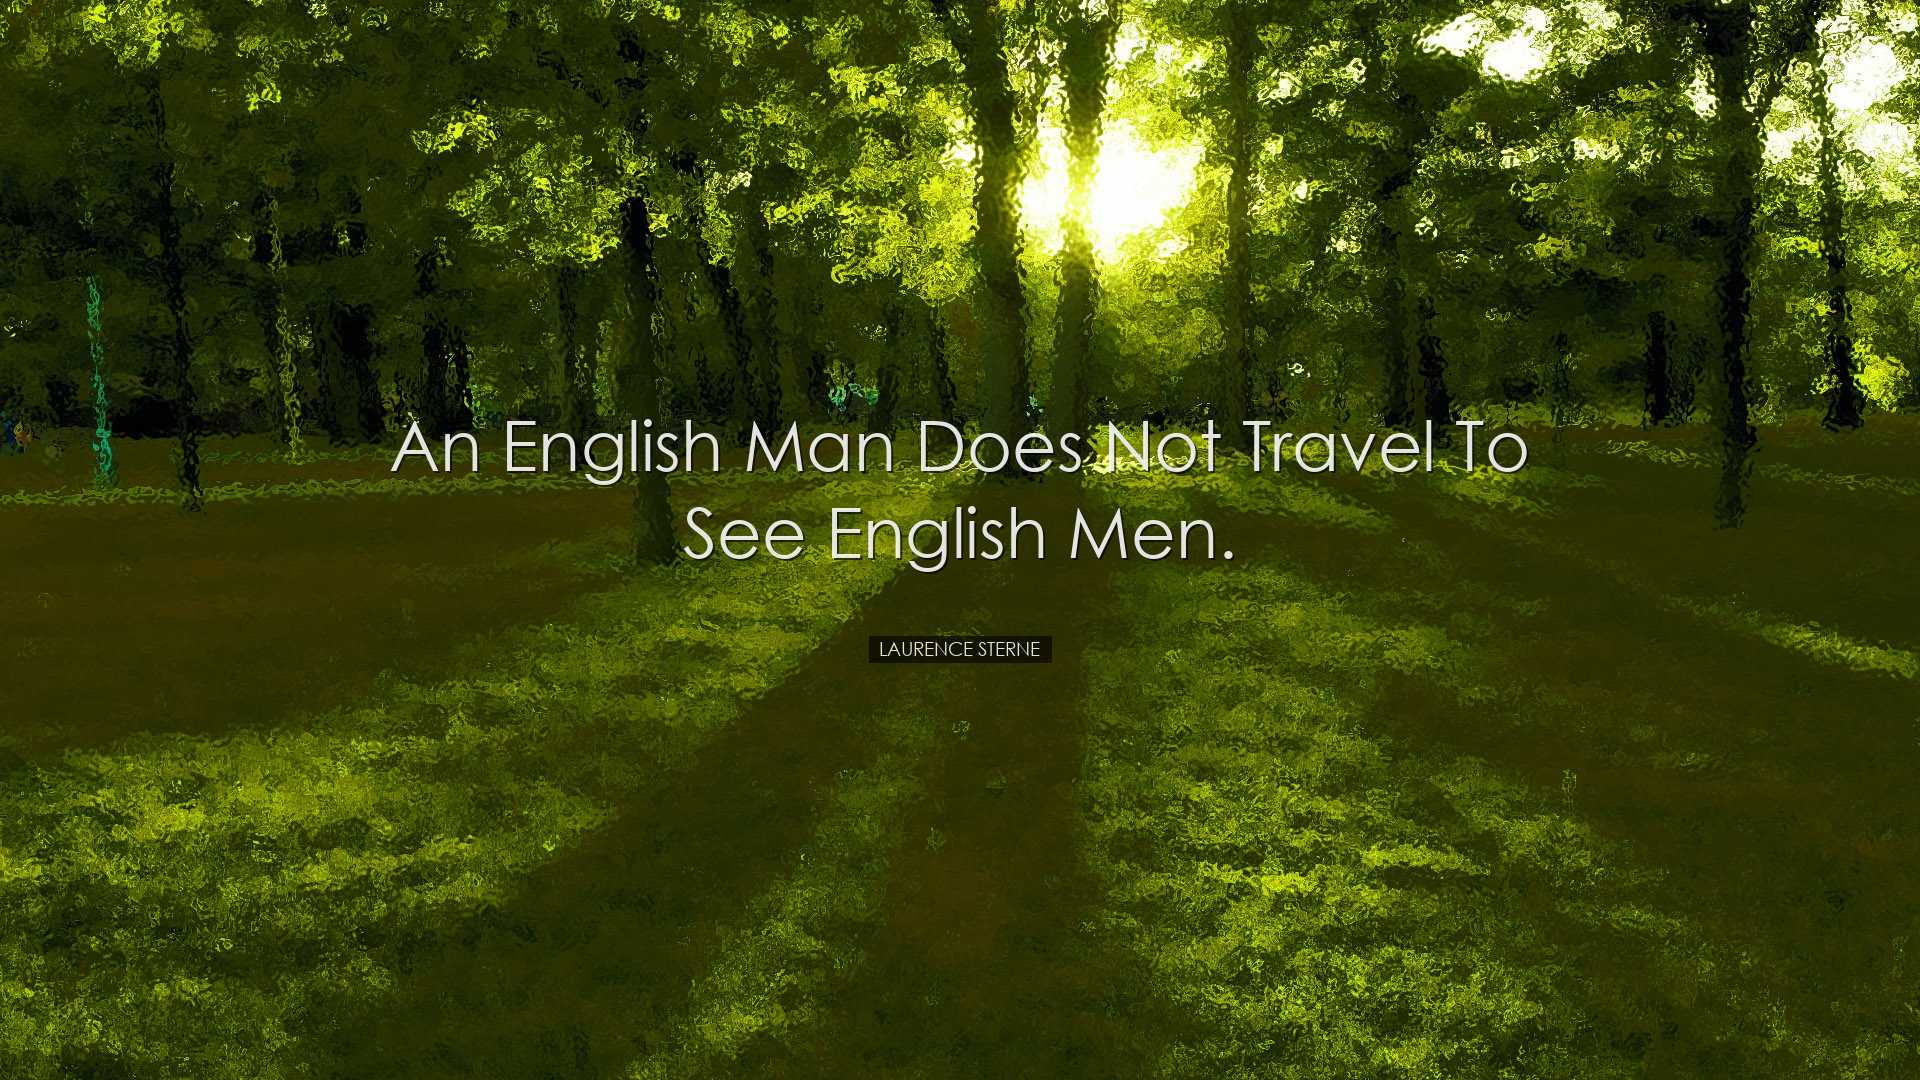 An English man does not travel to see English men. - Laurence Ster